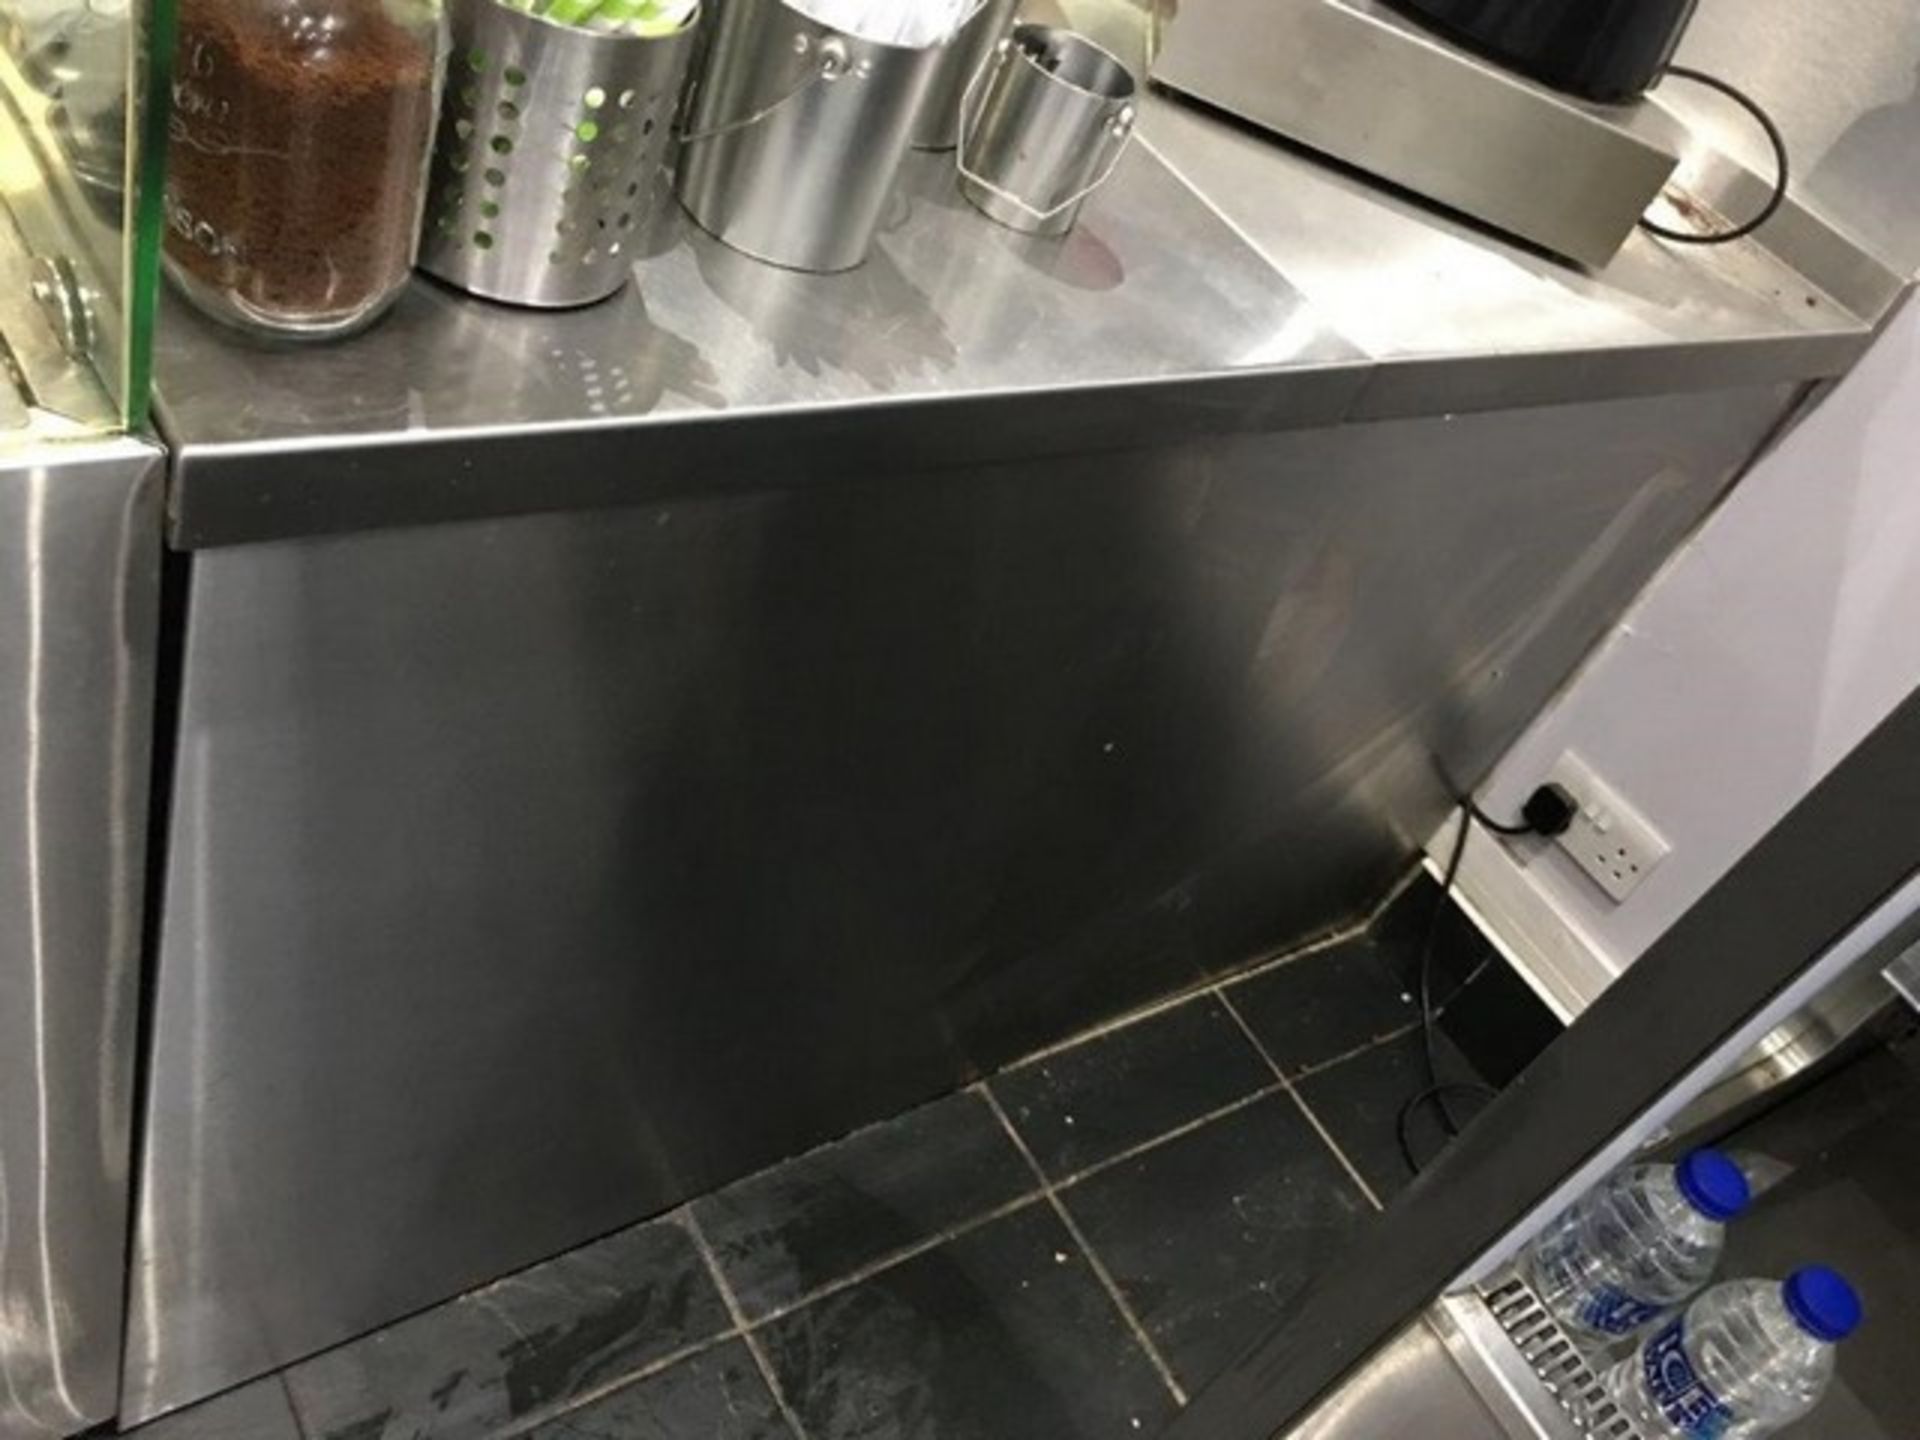 SMALL STAINLESS STEEL COUNTER C/W STORAGE 2FT LENGTH x 3FT HEIGHT x 3FT WIDTH - Image 2 of 2